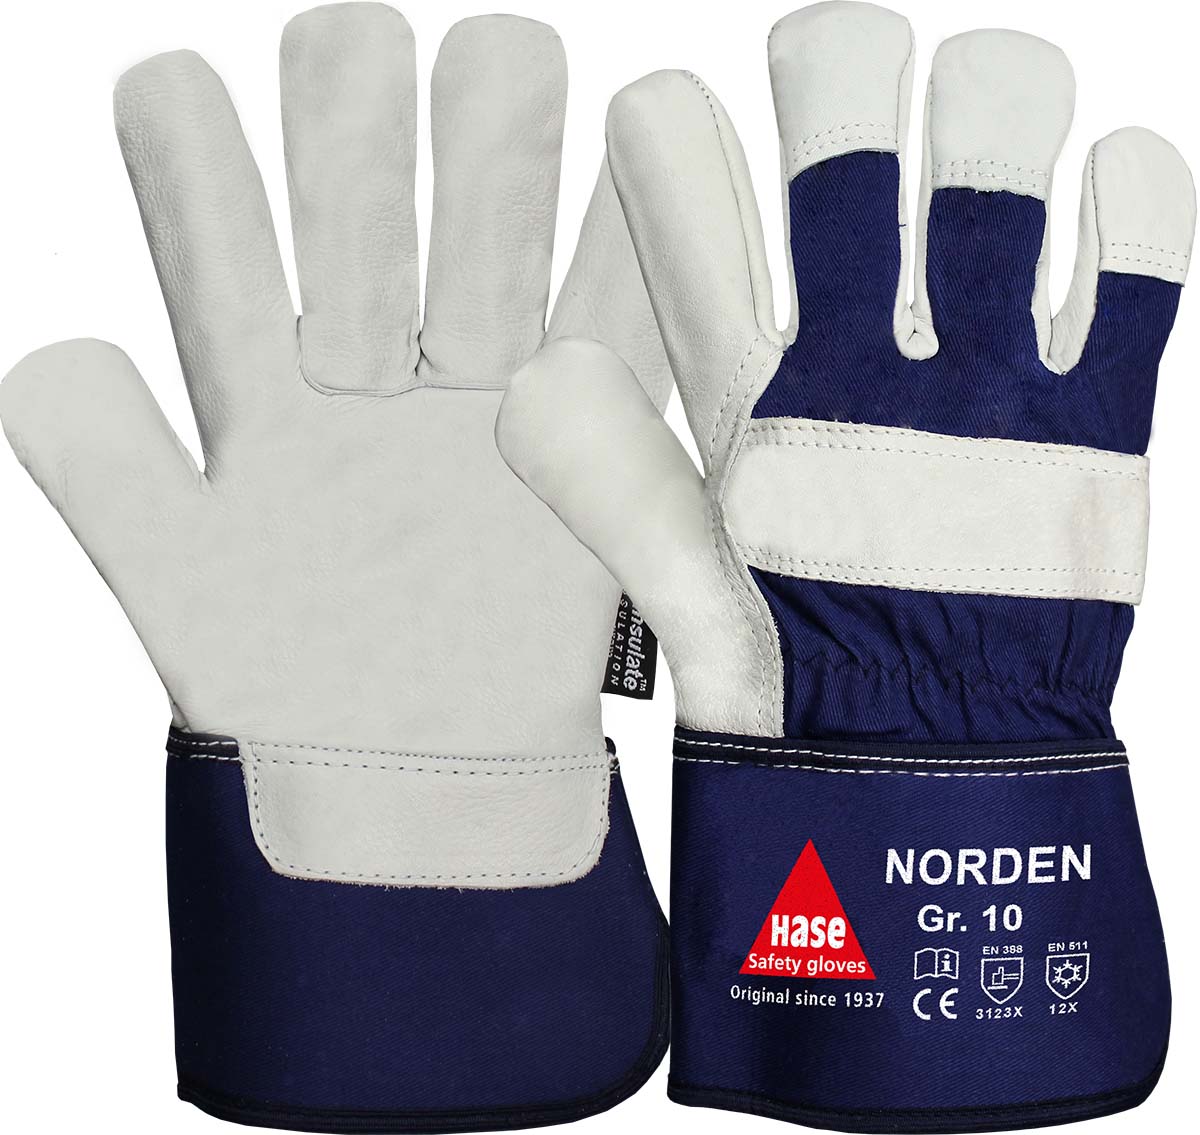 HASE Winter-/Arbeitshandschuh "Norden" Nr. 205500, VPE: 6 PA